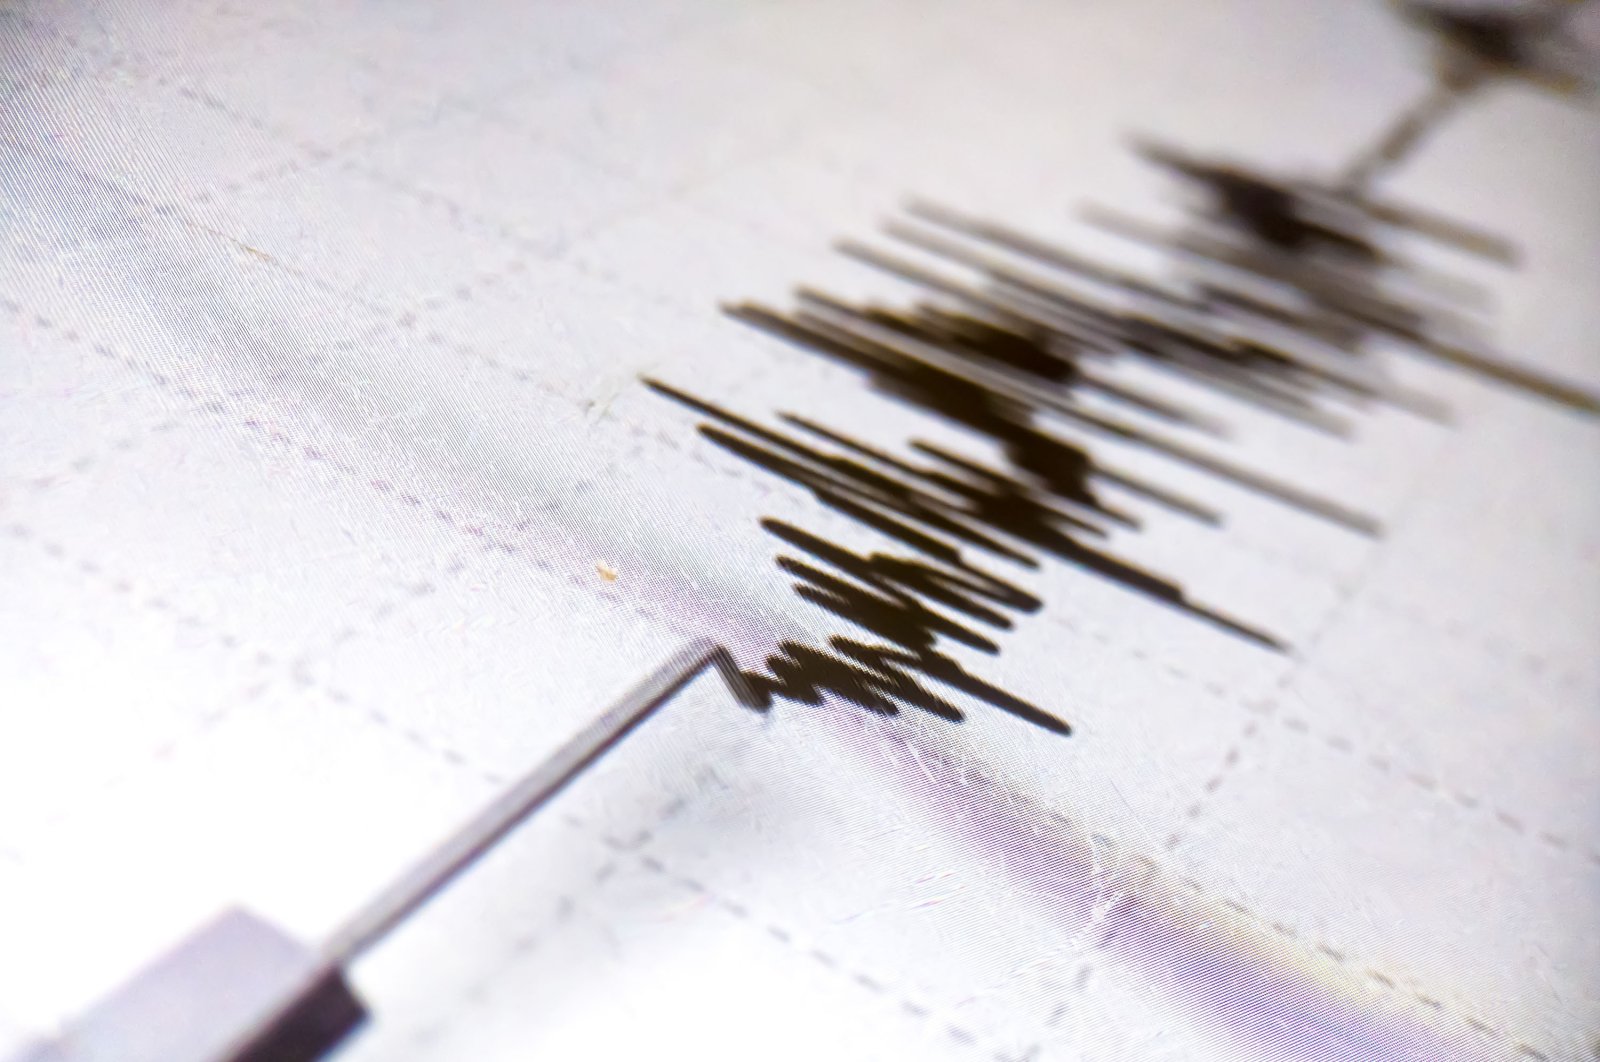 A Richter scale shows low and high earthquake waves with vibration on white paper background, in this undated file photo. (Shutterstock File Photo)